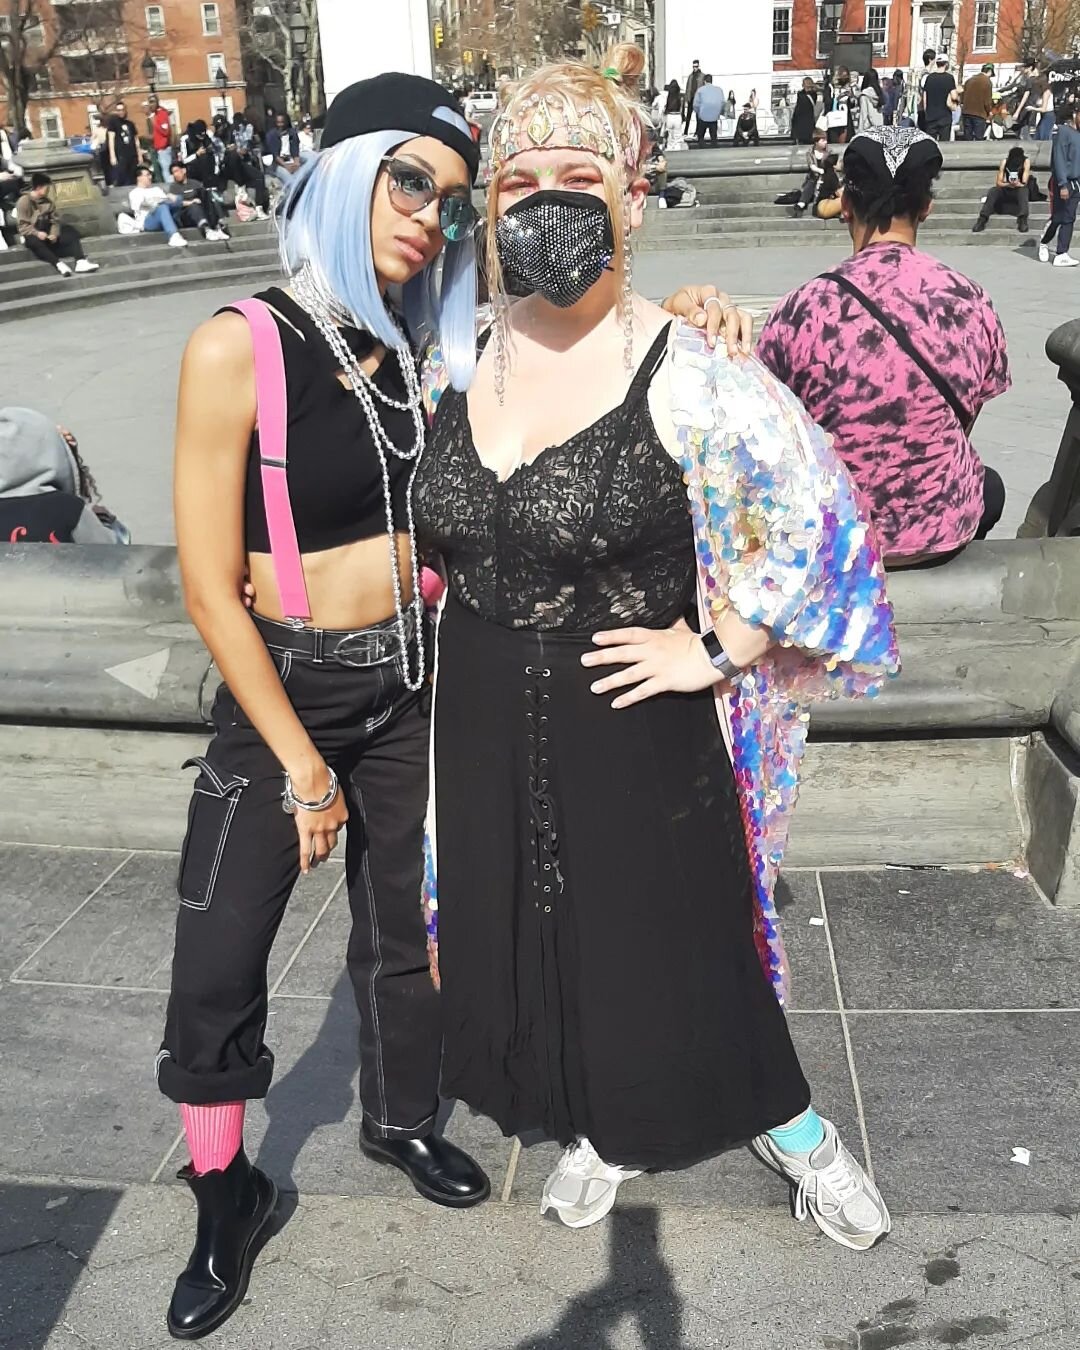 Oh my gosh, thank you NYC!

What an incredible month this has been, serving looks and sharing sparkly shiny goodies with you. Today was gorgeous and I had so much fun bringing cyberpunk realness with my gorgeous partner in crime @mizukilives1 

Thank